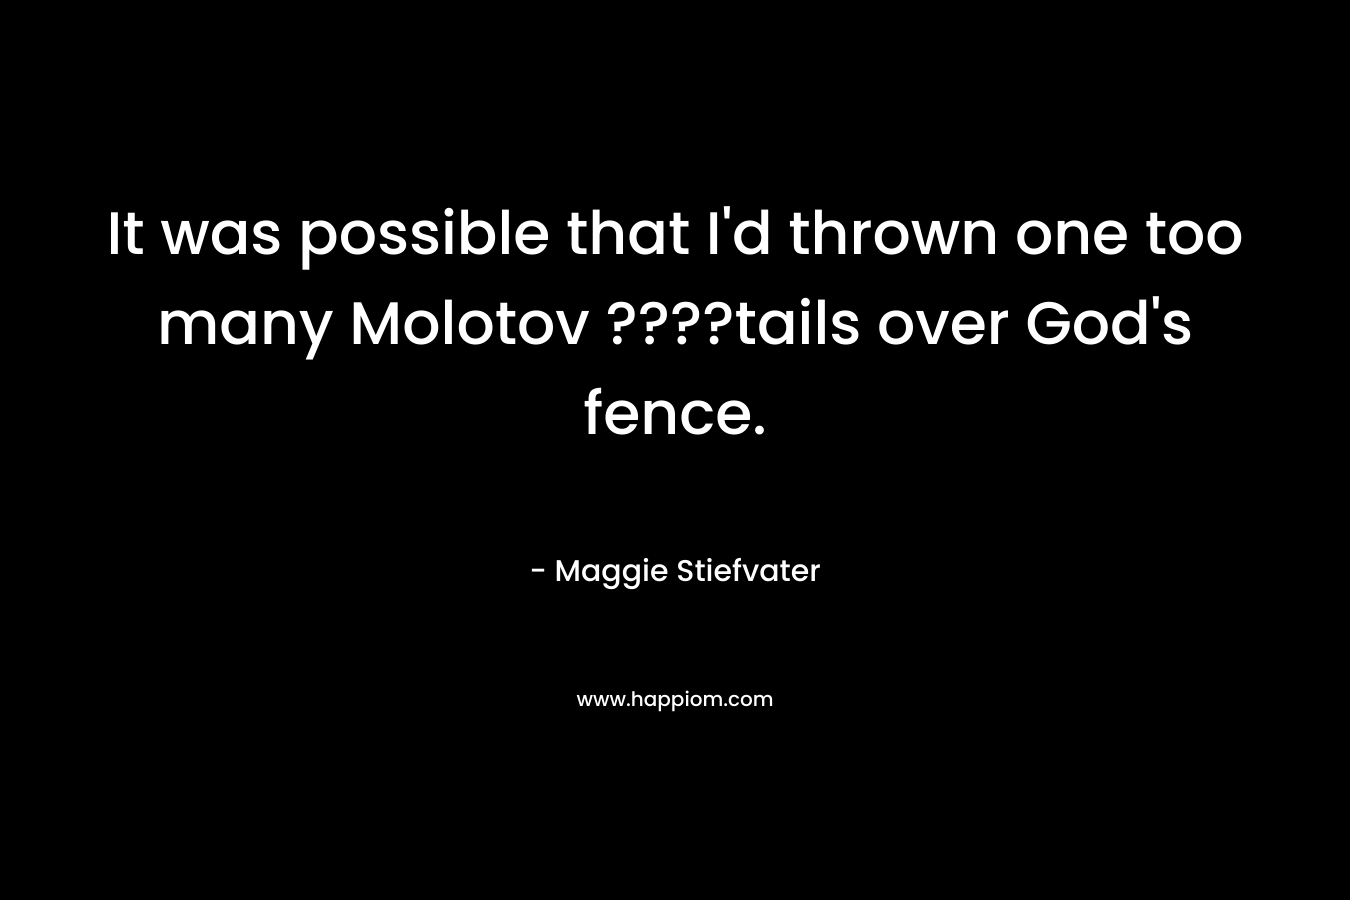 It was possible that I'd thrown one too many Molotov ????tails over God's fence.